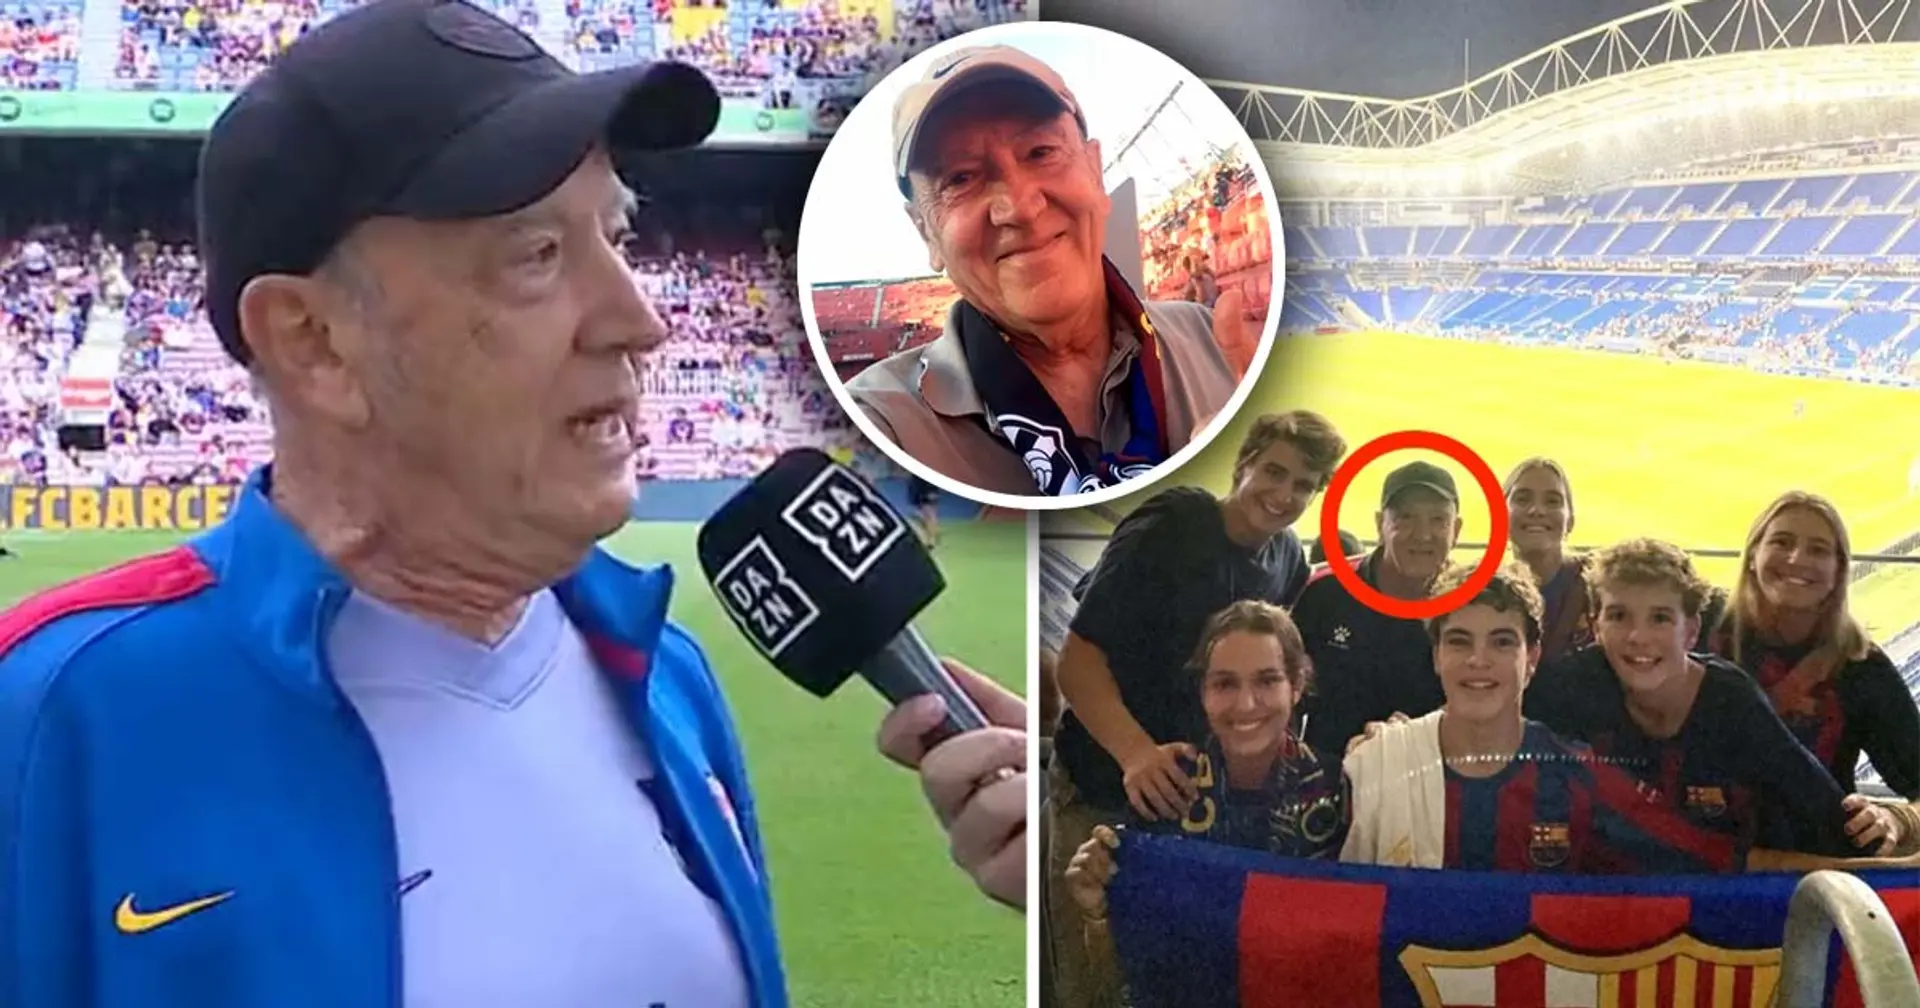 'I missed only one Barca game in 50 years. I was in the intensive care that day': Life-long fan Luchi Parettchi